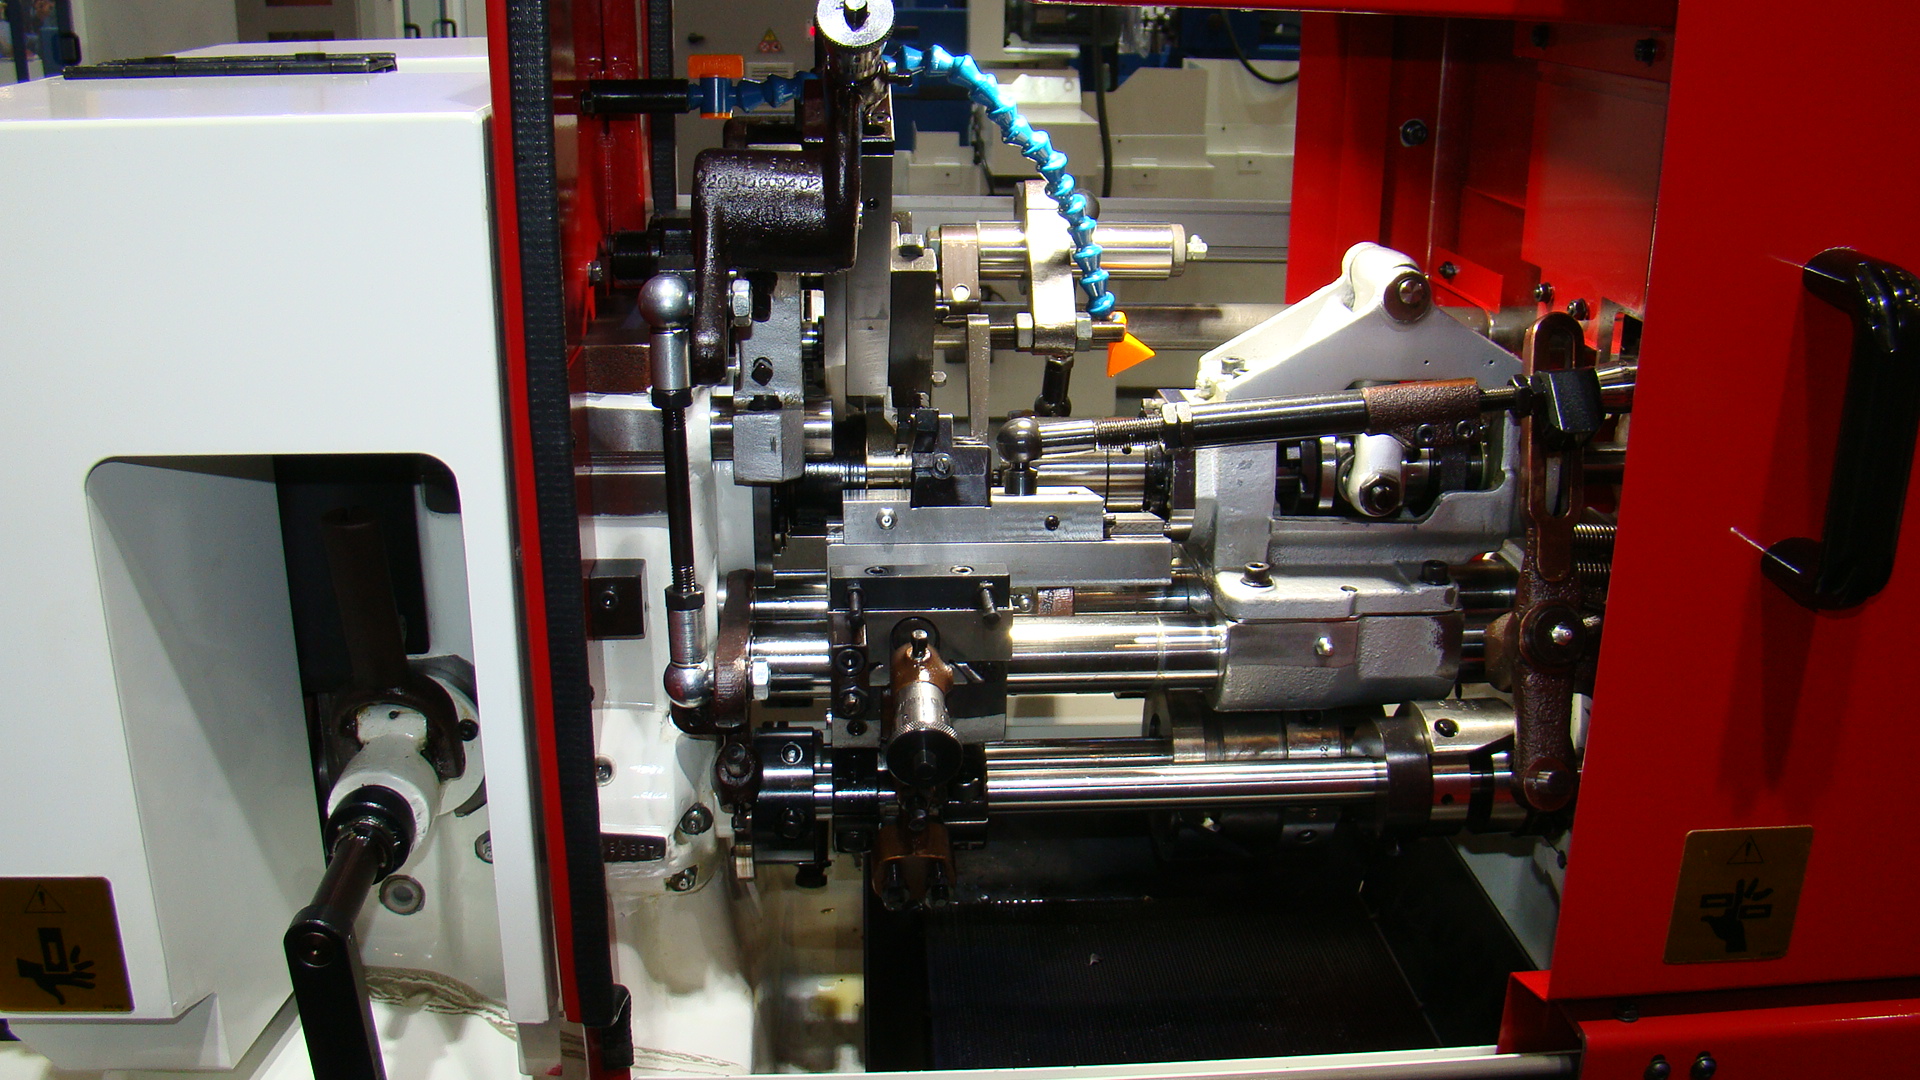 The Ergomat A 25 E automatic lathe is targeted for high-volume production of parts with short cycle times and has a small footprint.